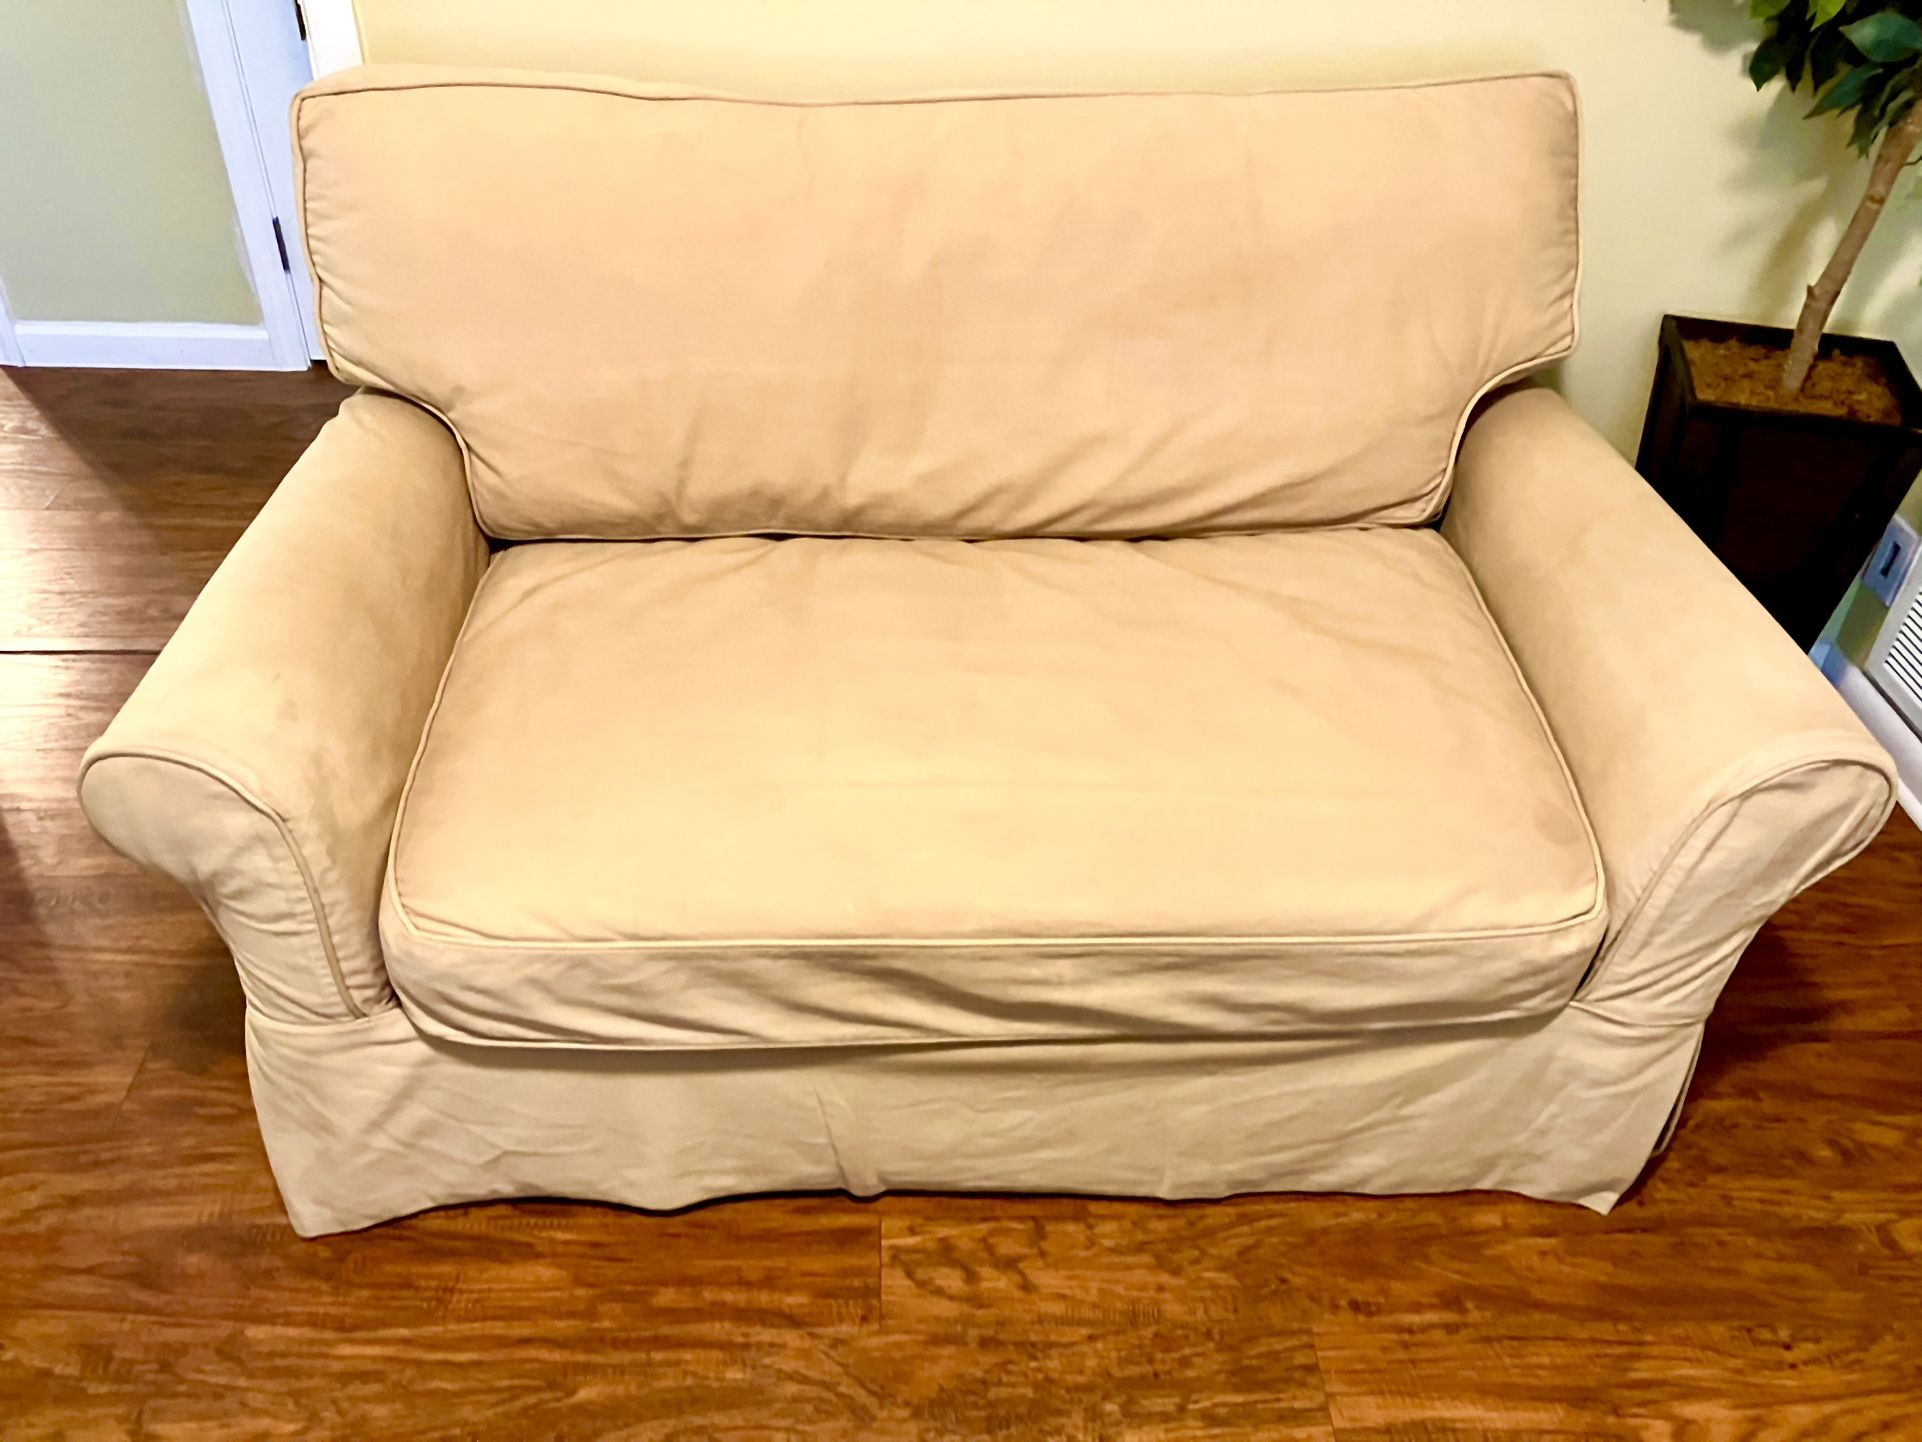 Loveseat Couch W/pullout Sleeper Sofa